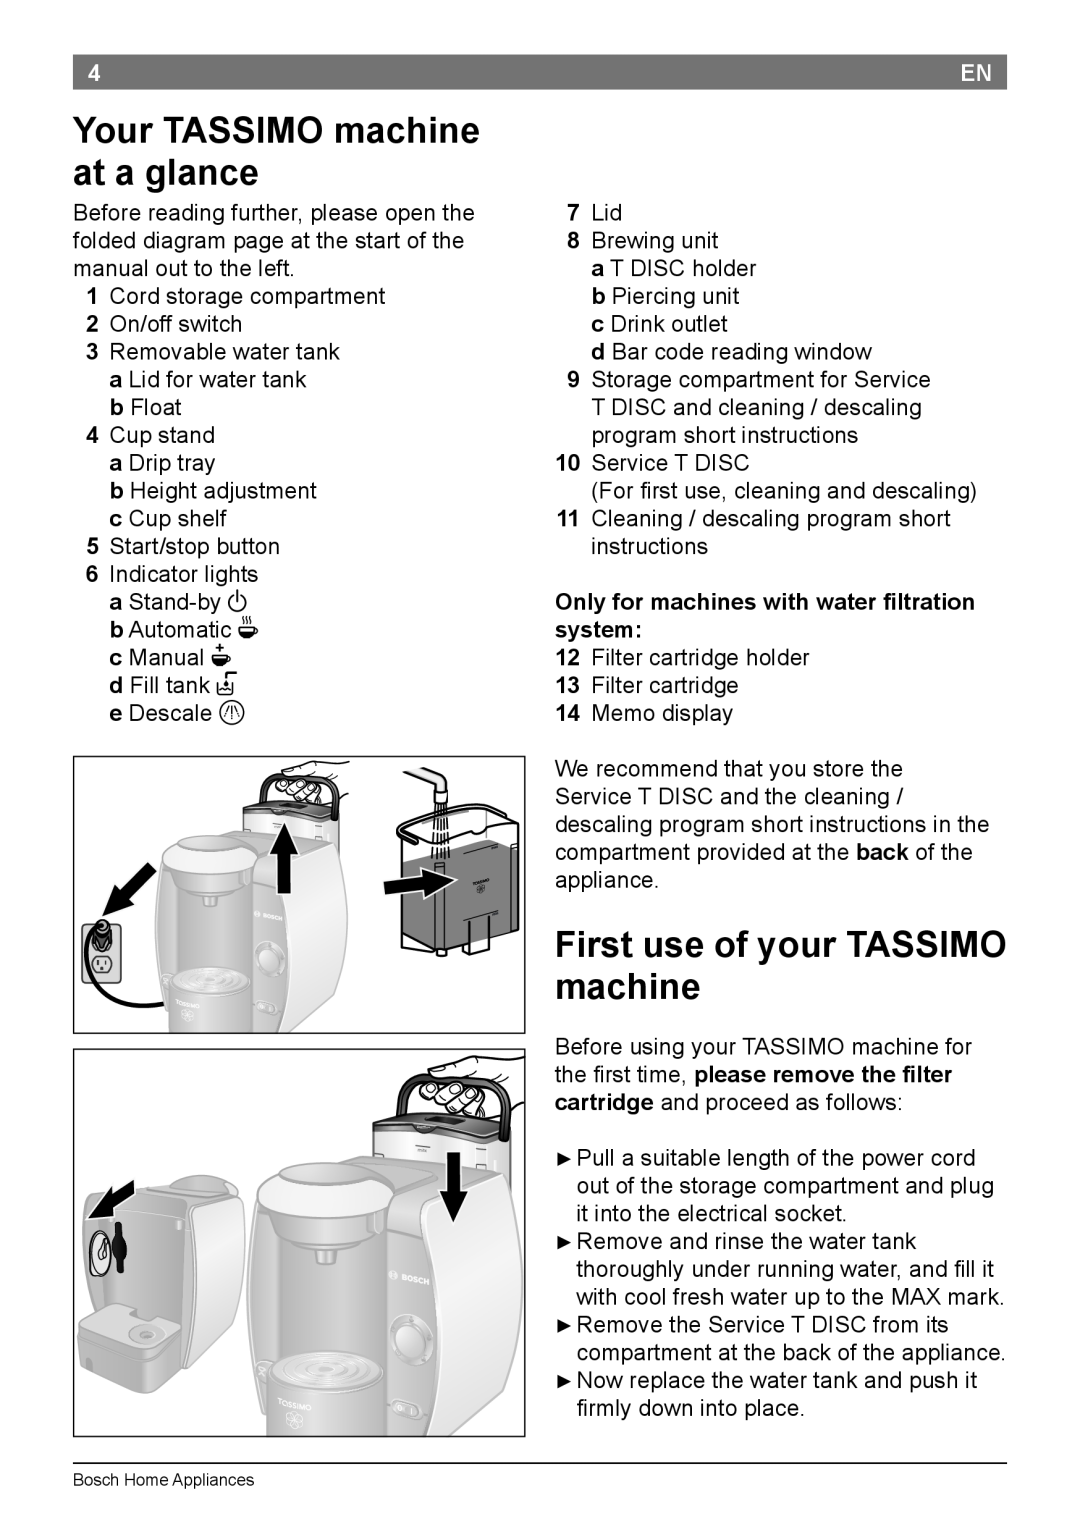 Bosch Appliances T45 instruction manual Your TASSIMO machine at a glance, First use of your TASSIMO machine 